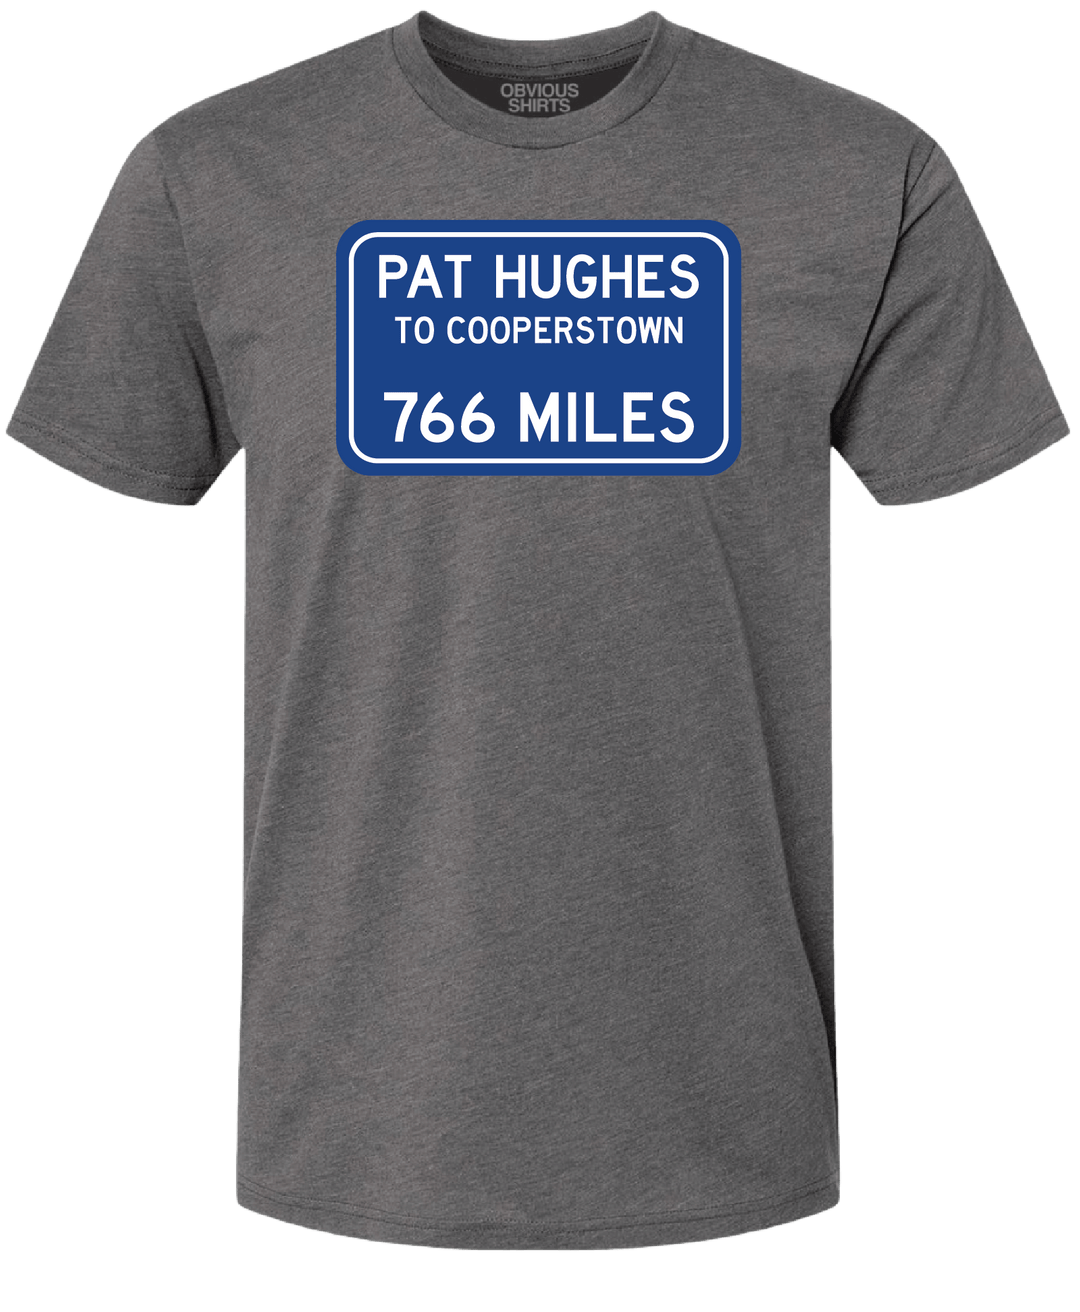 PAT HUGHES TO COOPERSTOWN. - OBVIOUS SHIRTS